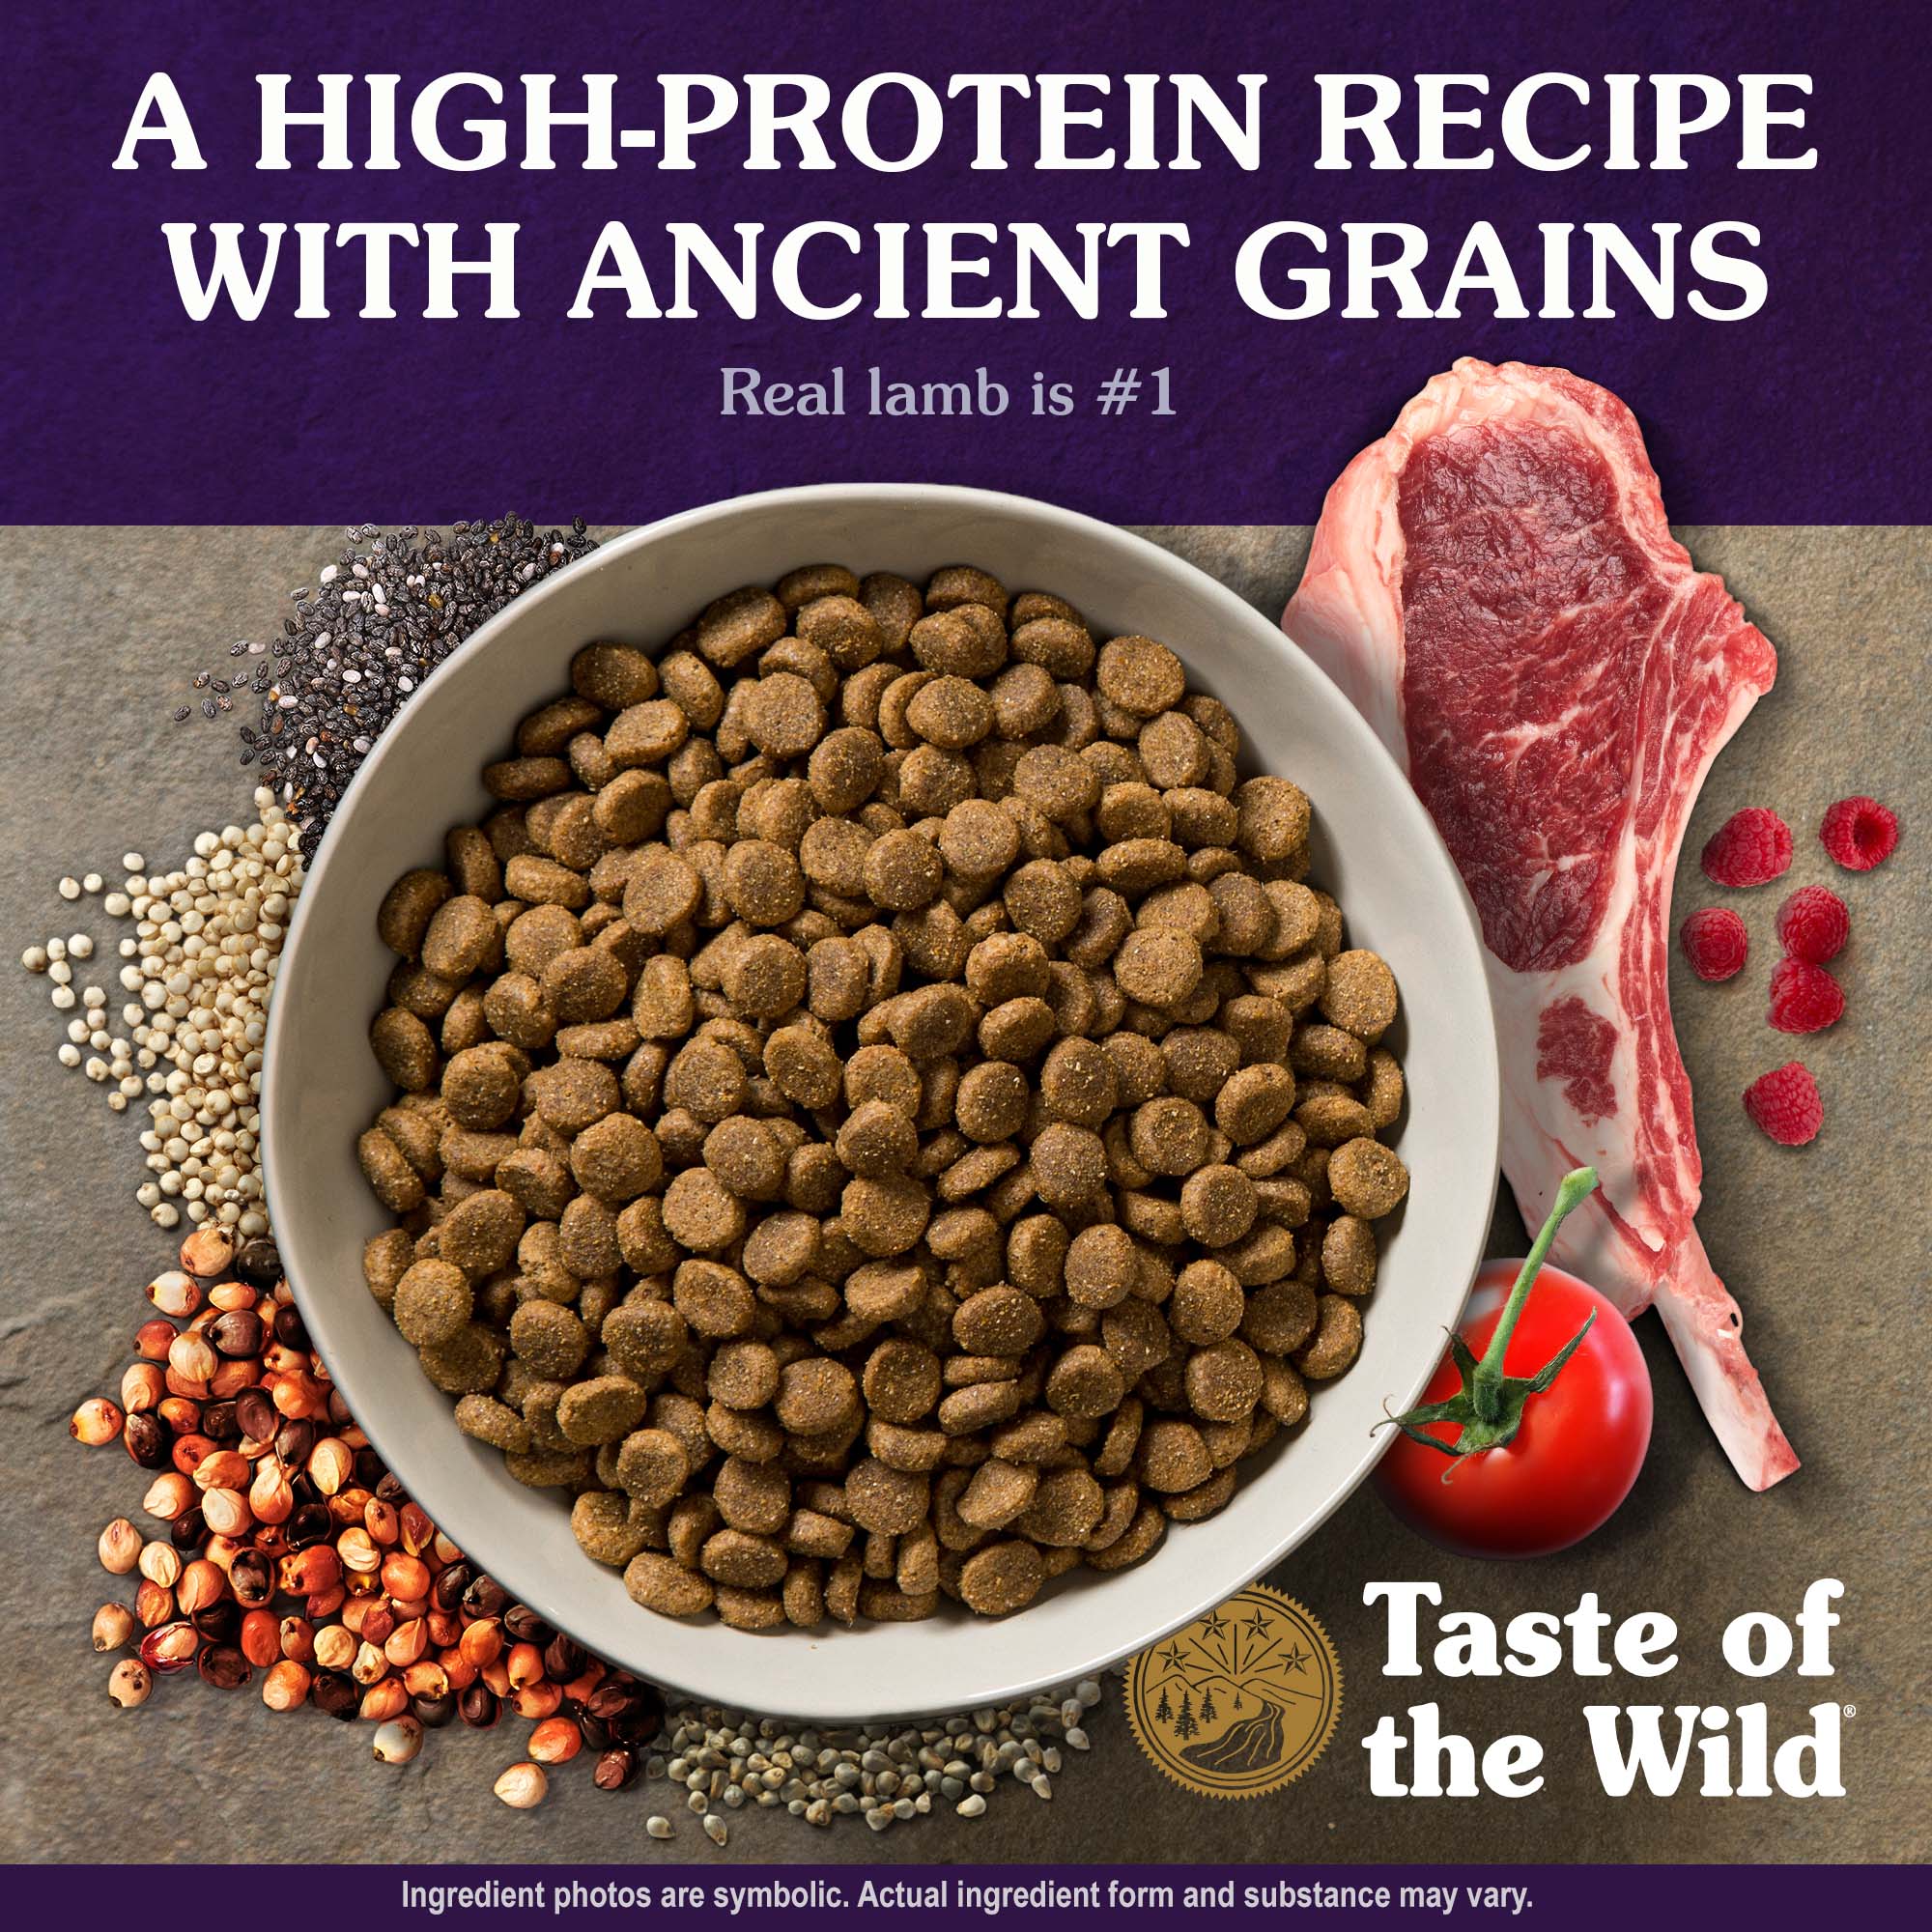 A white ceramic bowl full of Ancient Mountain Canine Recipe with Roasted Lamb kibble surrounded by an assortment of grains, fruits, and meat.